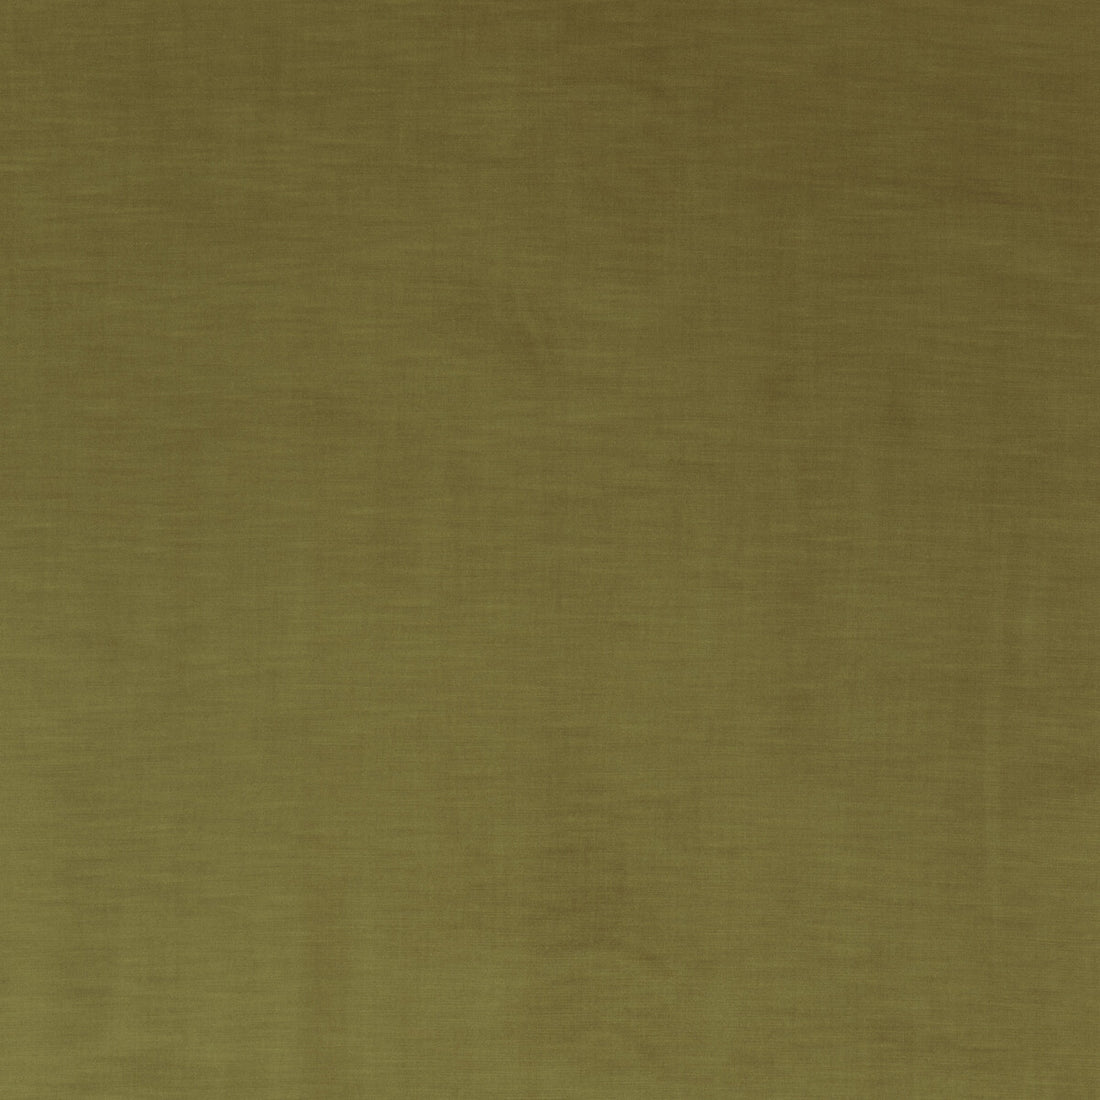 Coniston Velvet fabric in ochre color - pattern BF10781.840.0 - by G P &amp; J Baker in the Coniston Velvet collection